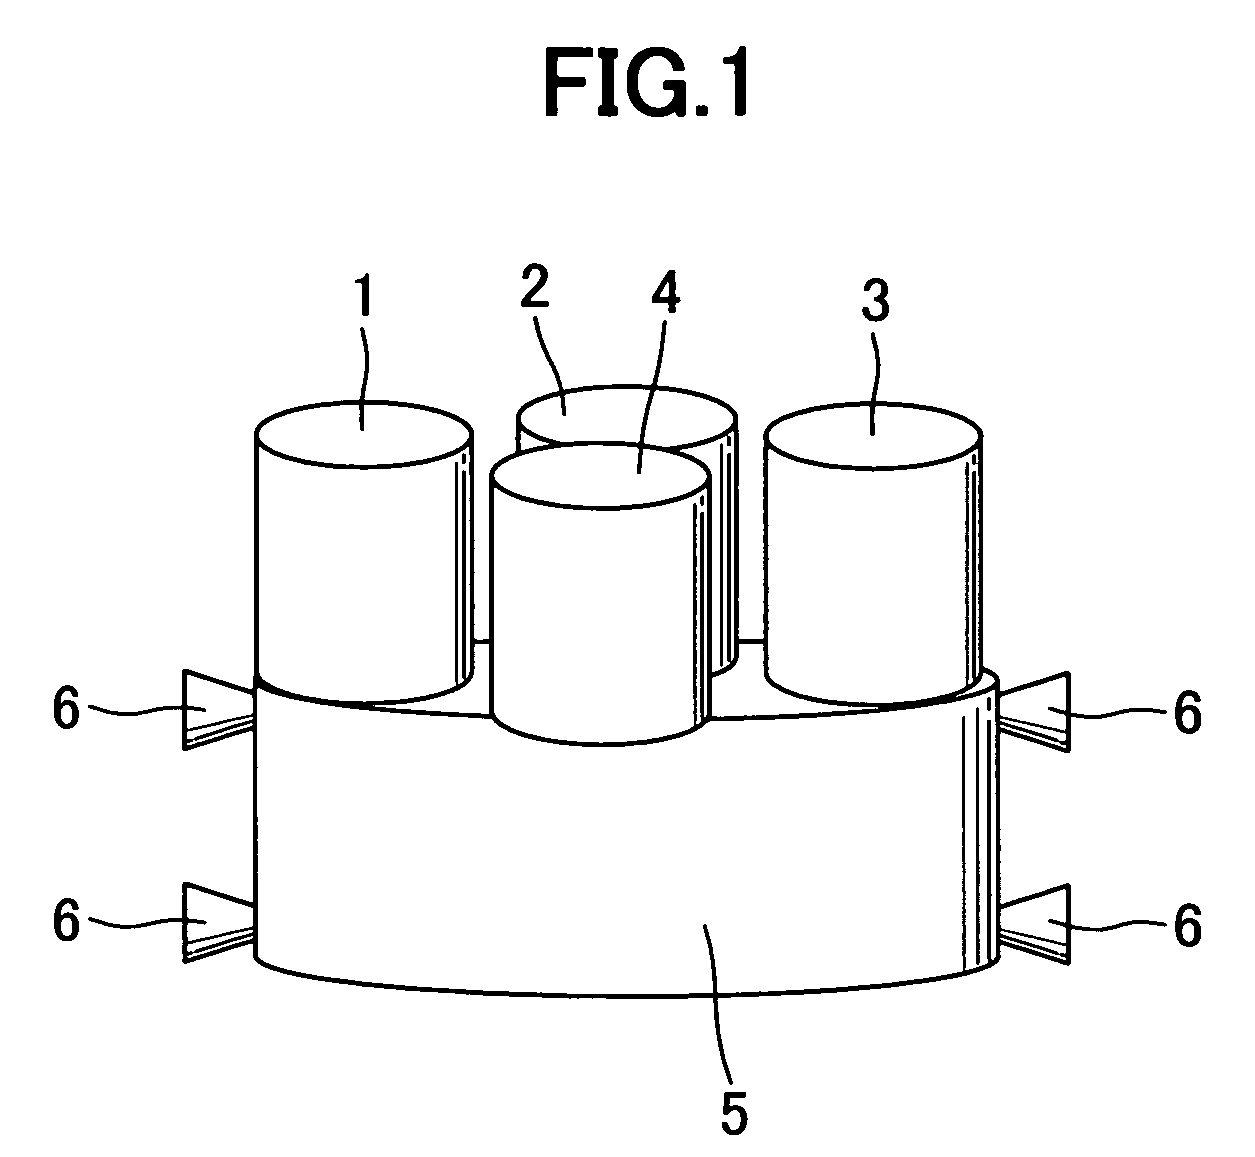 Method of injecting plurality of spacecraft into different orbits individually